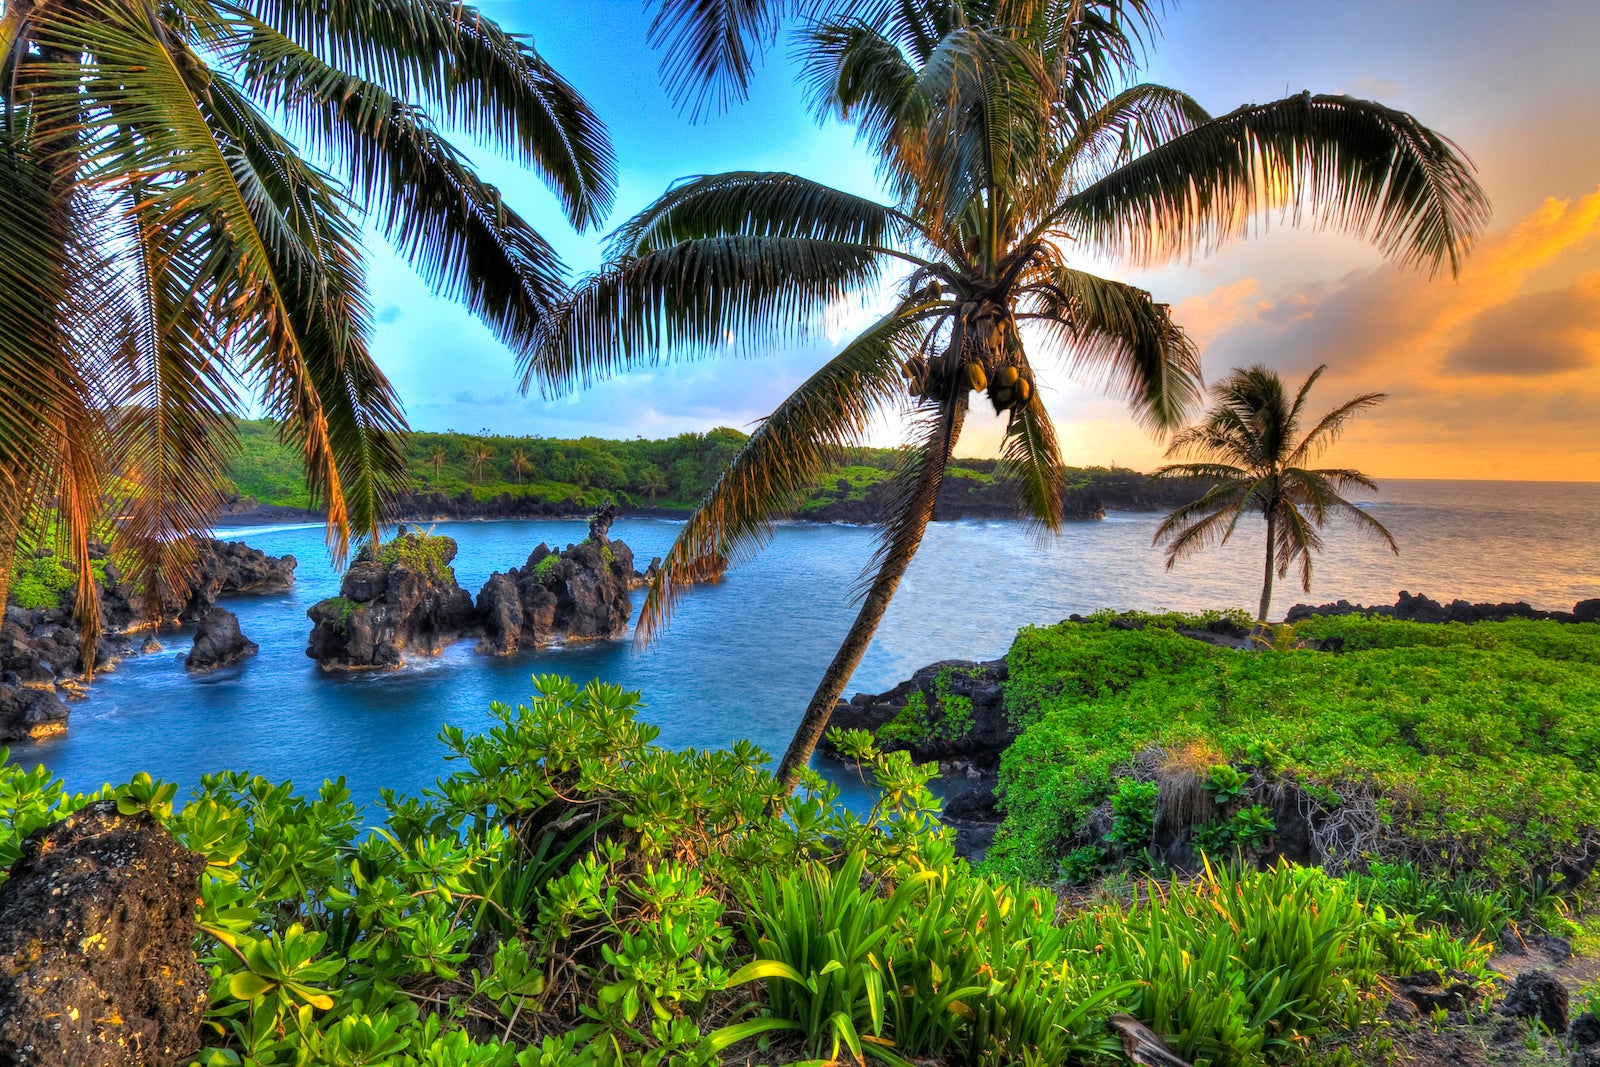 You are currently viewing American offering round-trip flights to Hawaii from multiple US cities starting at $296